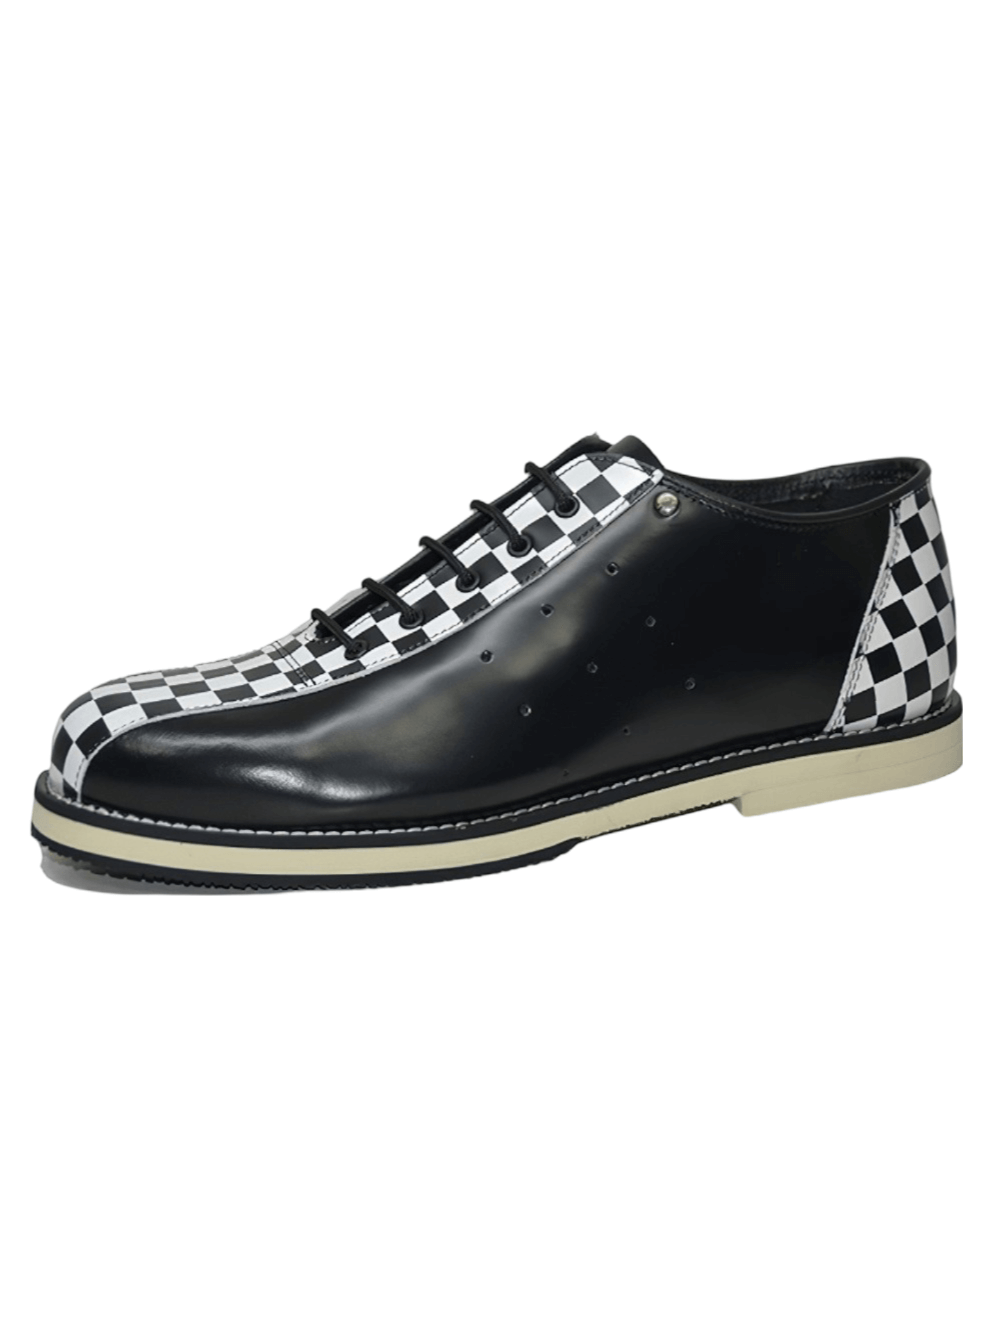 Unisex Lace-Up Bowling Shoes in Black and White